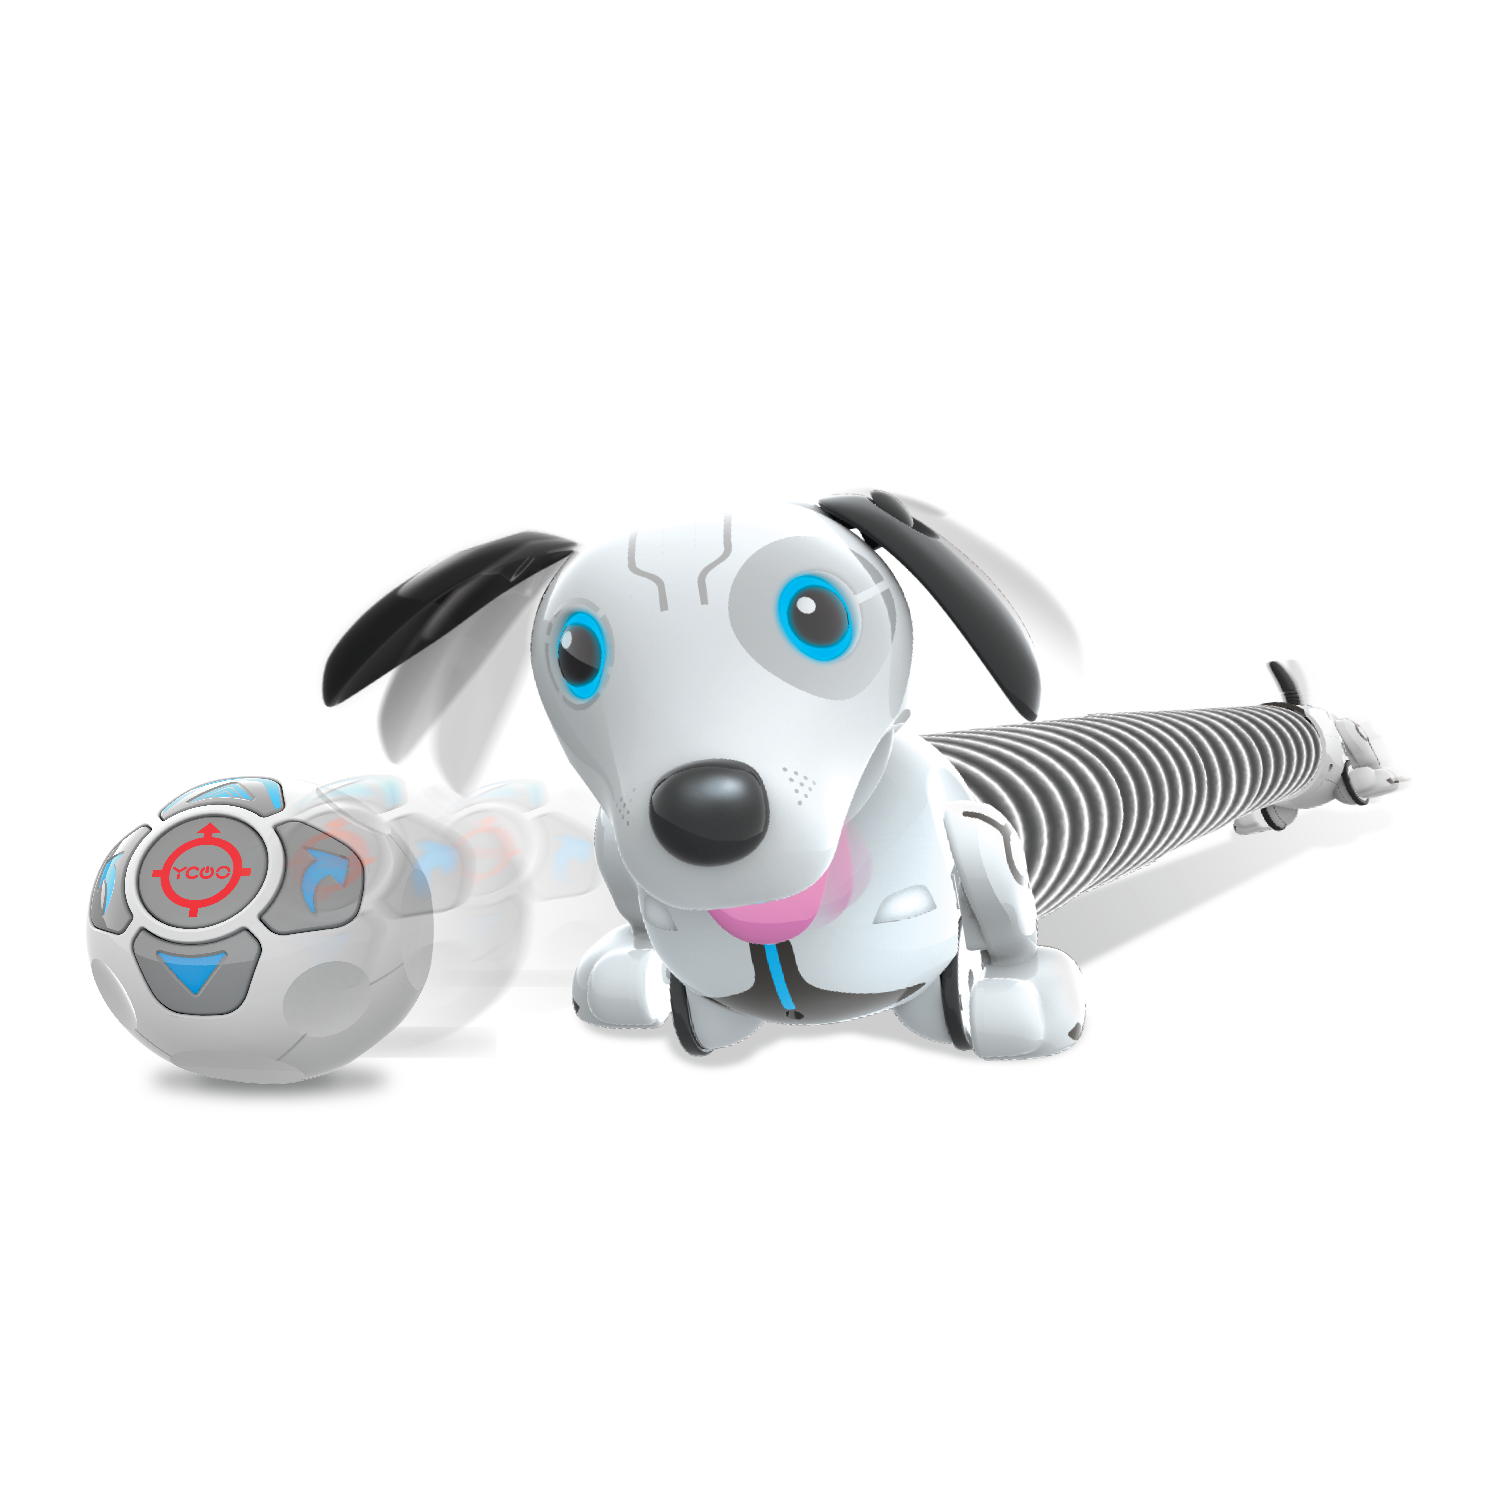 Robots Silverlit ycoo 3 in 1, Droid behind me! (88582s) robot vector robot,  robot toy, robotics, Robot dog, robot with voice control, Intelligent robot,,smart  toy for children,Interactive toys,Tobot - AliExpress